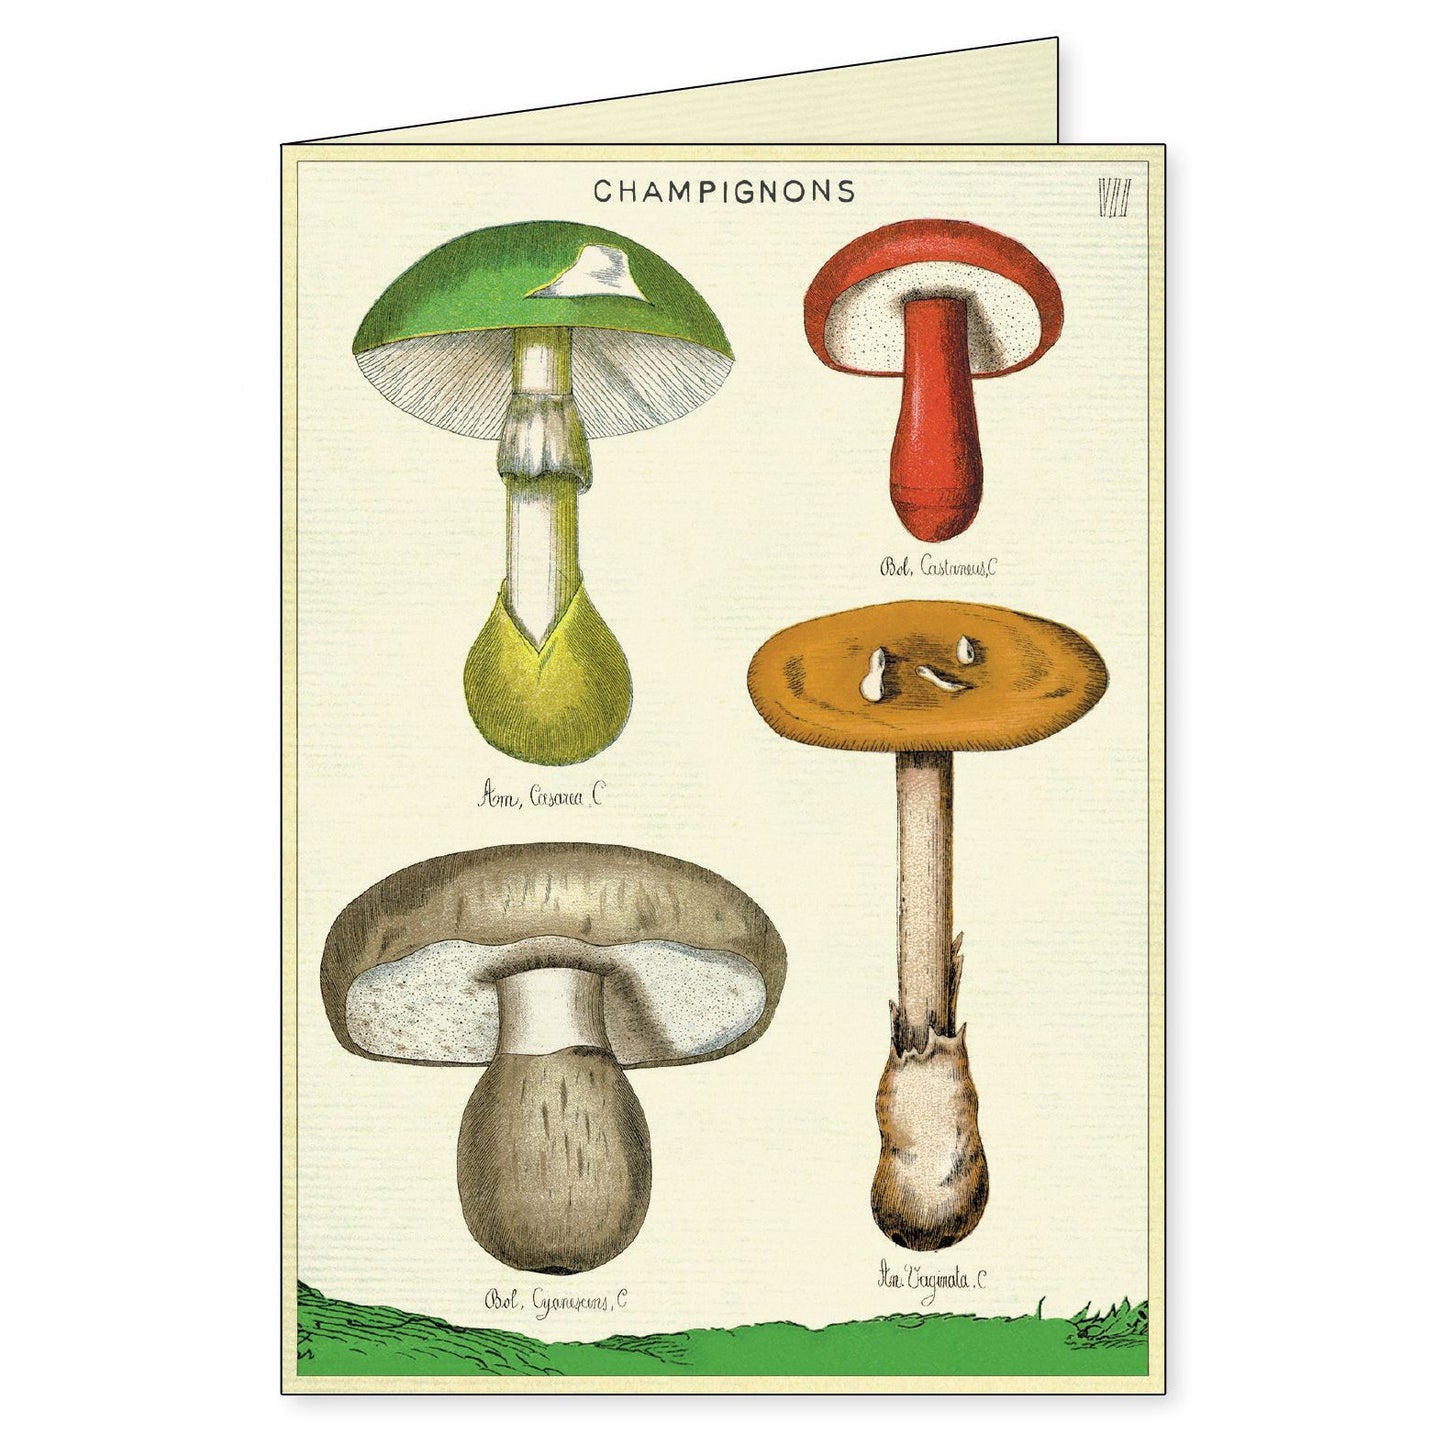 Cavallini & Co. Boxed Note Cards - Foraging